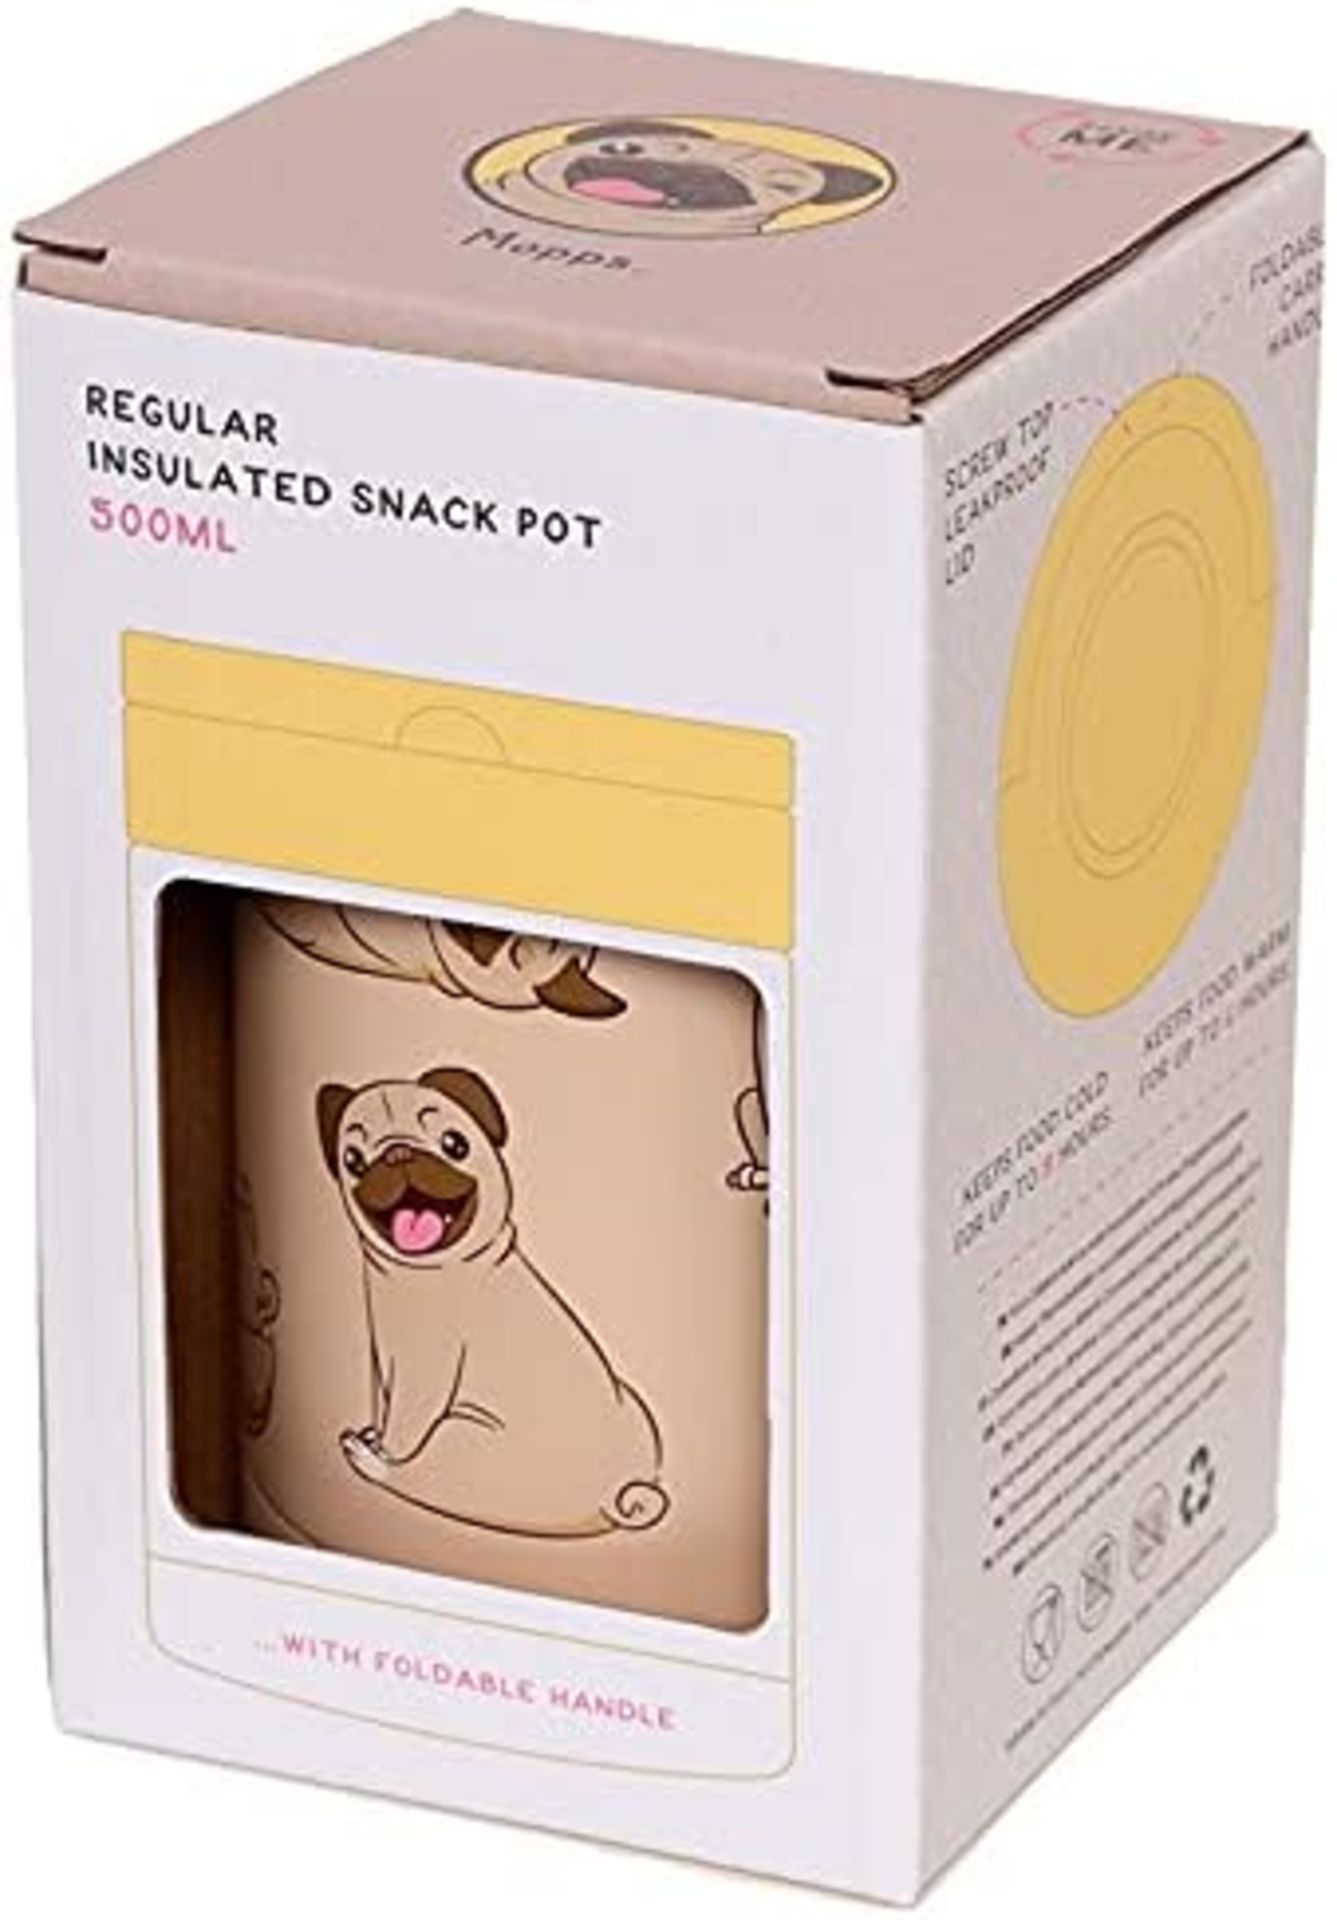 20 X NEW PUG HOT & COLD LUNCH POT 500ML - Image 2 of 4